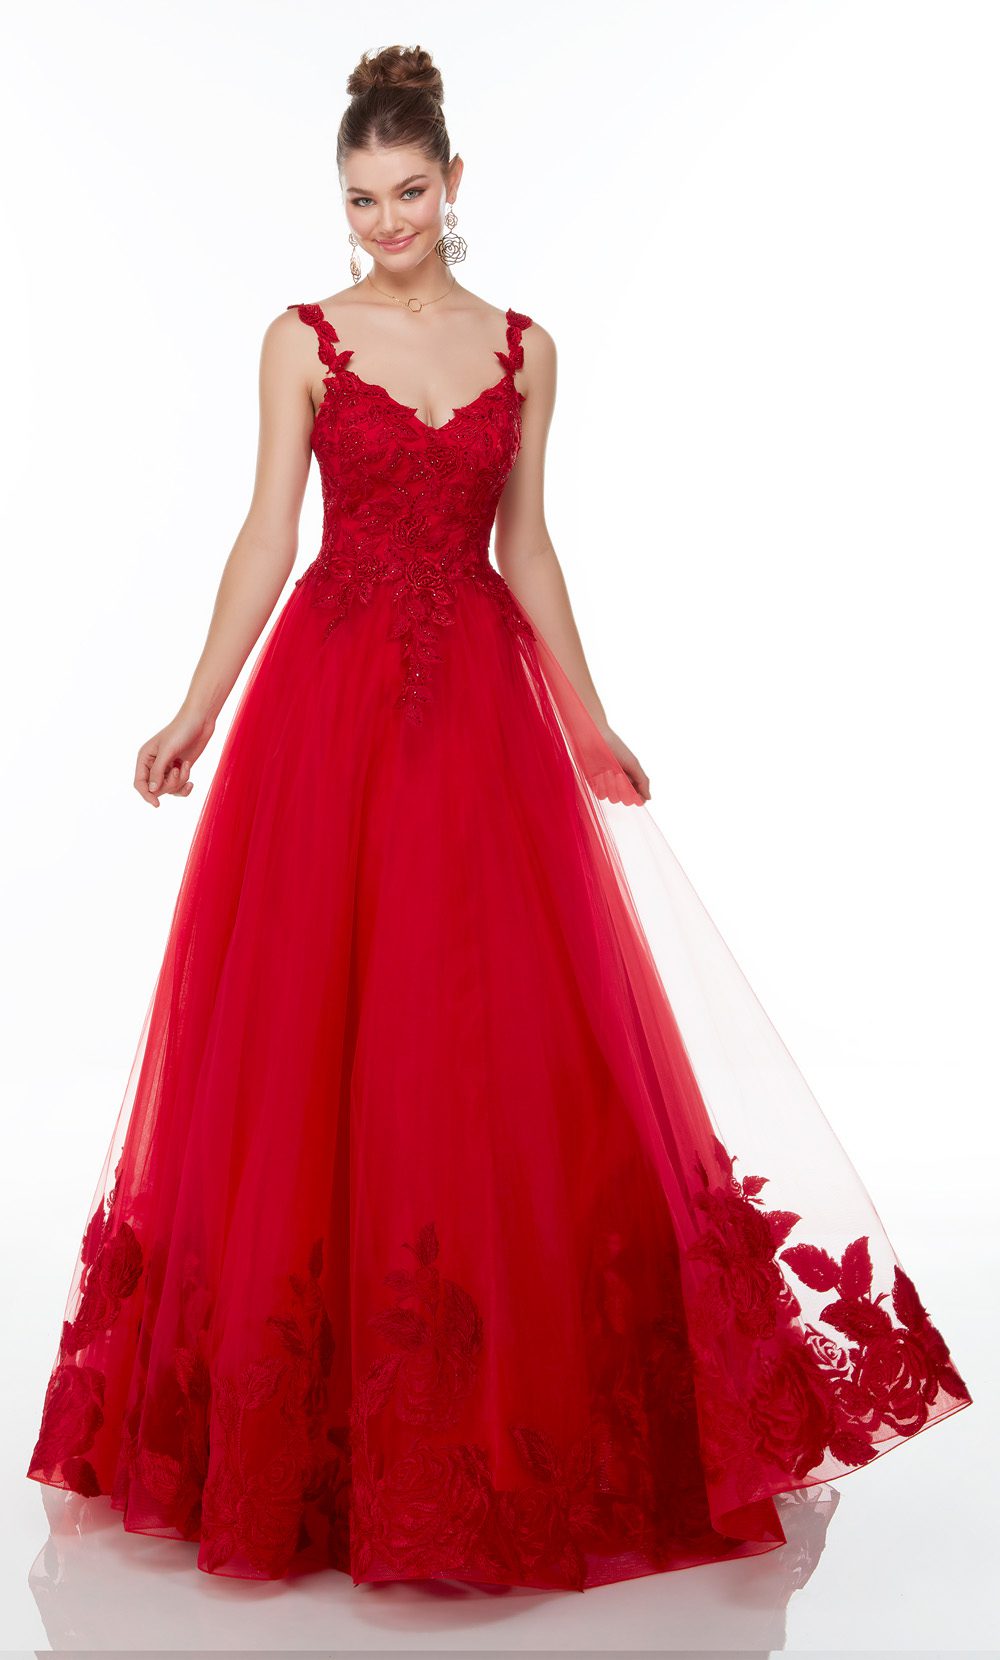 A red gown